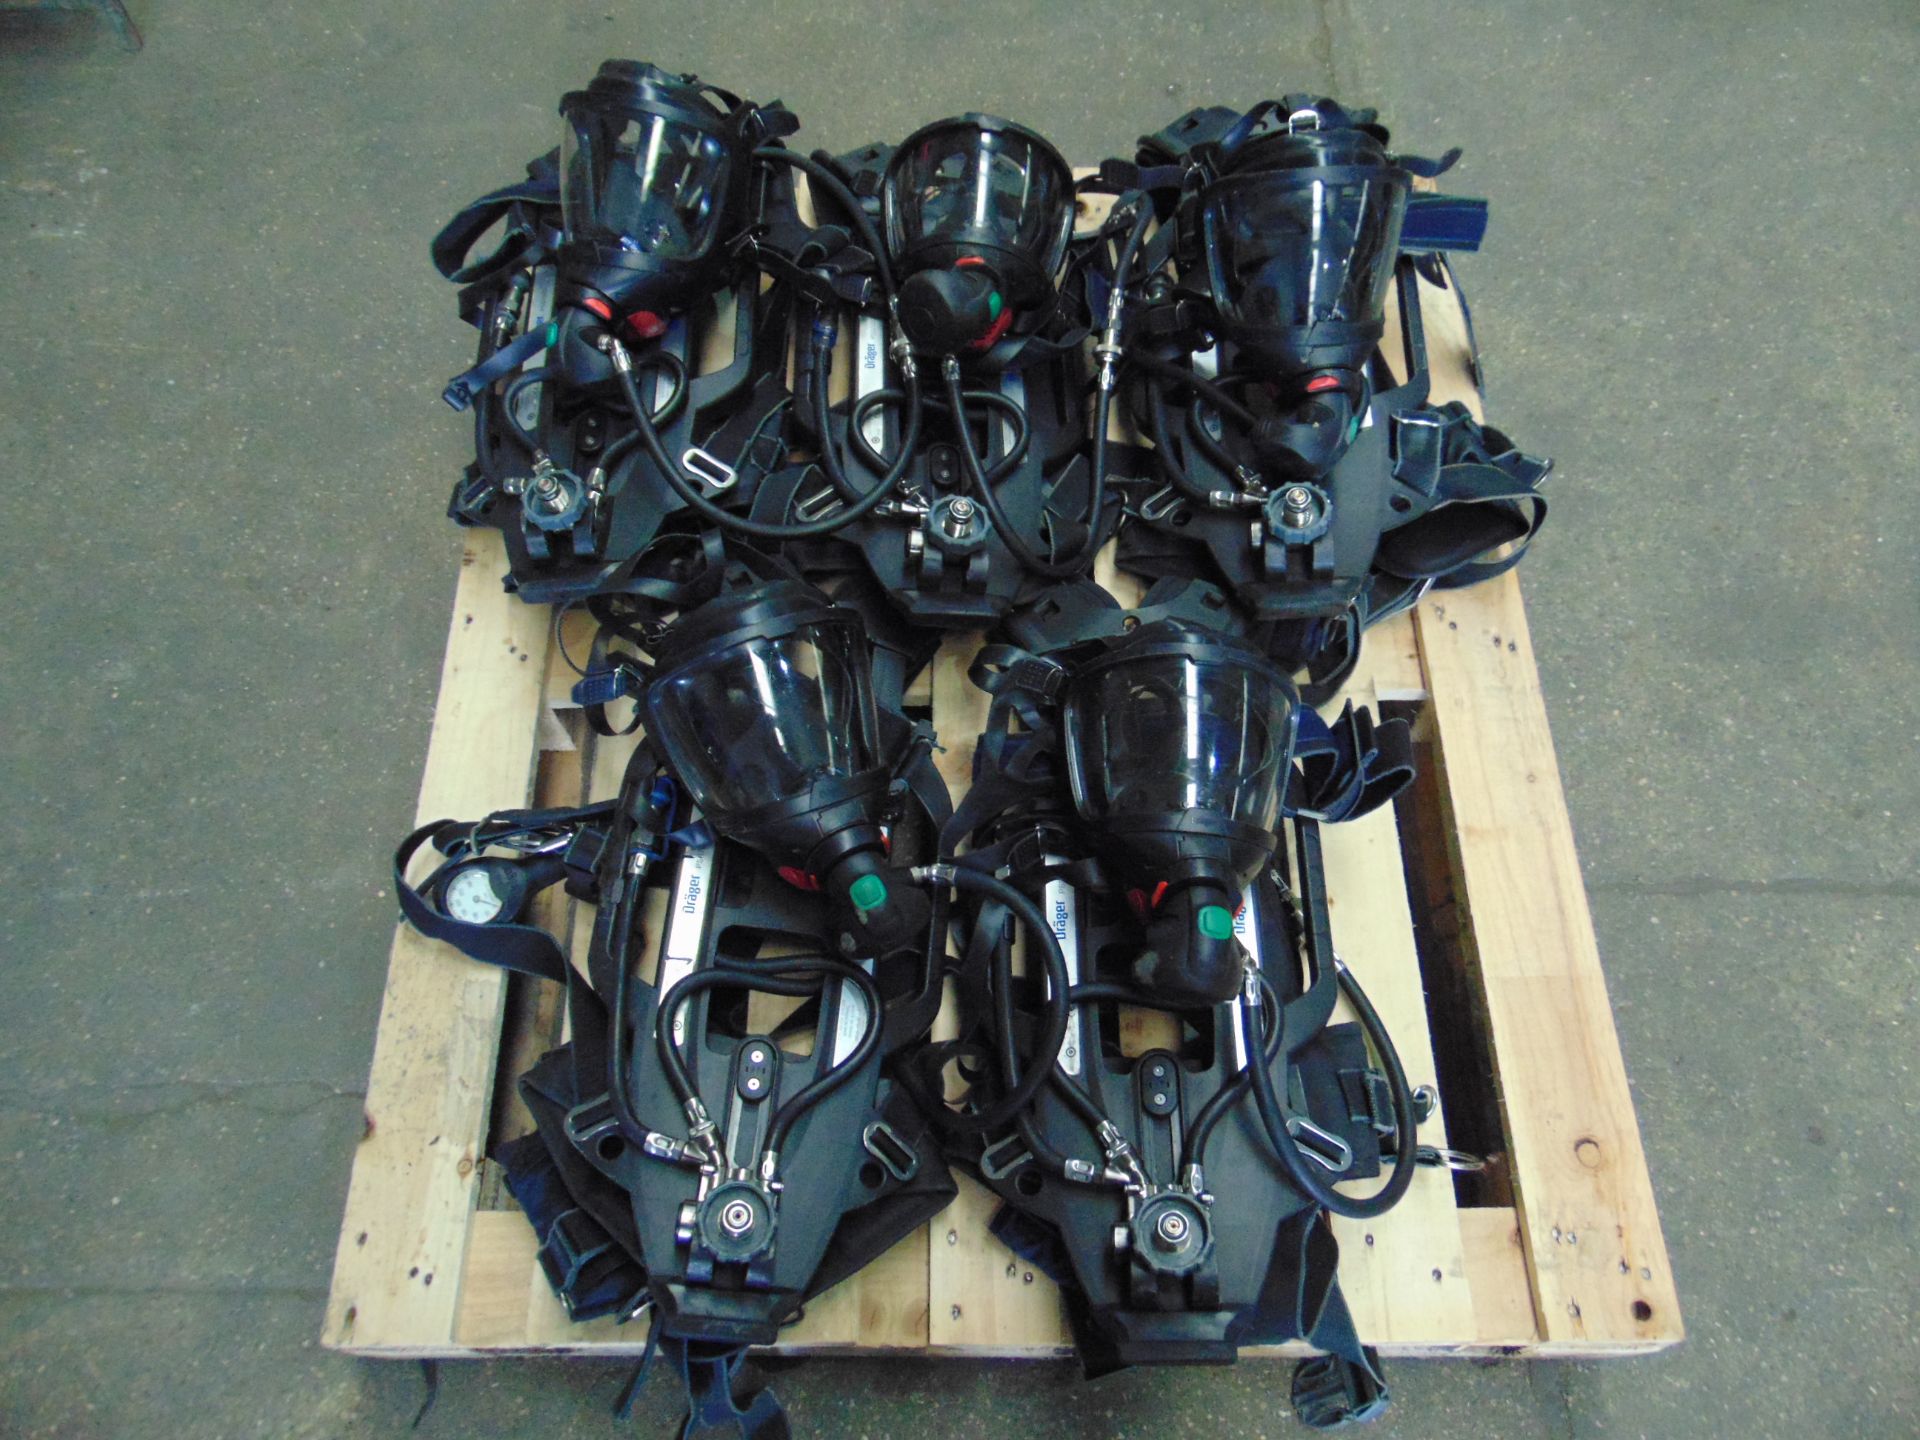 5 x Drager PSS 7000 Self Contained Breathing Apparatus w/ 10 x Drager 300 Bar Air Cylinders - Bild 8 aus 21